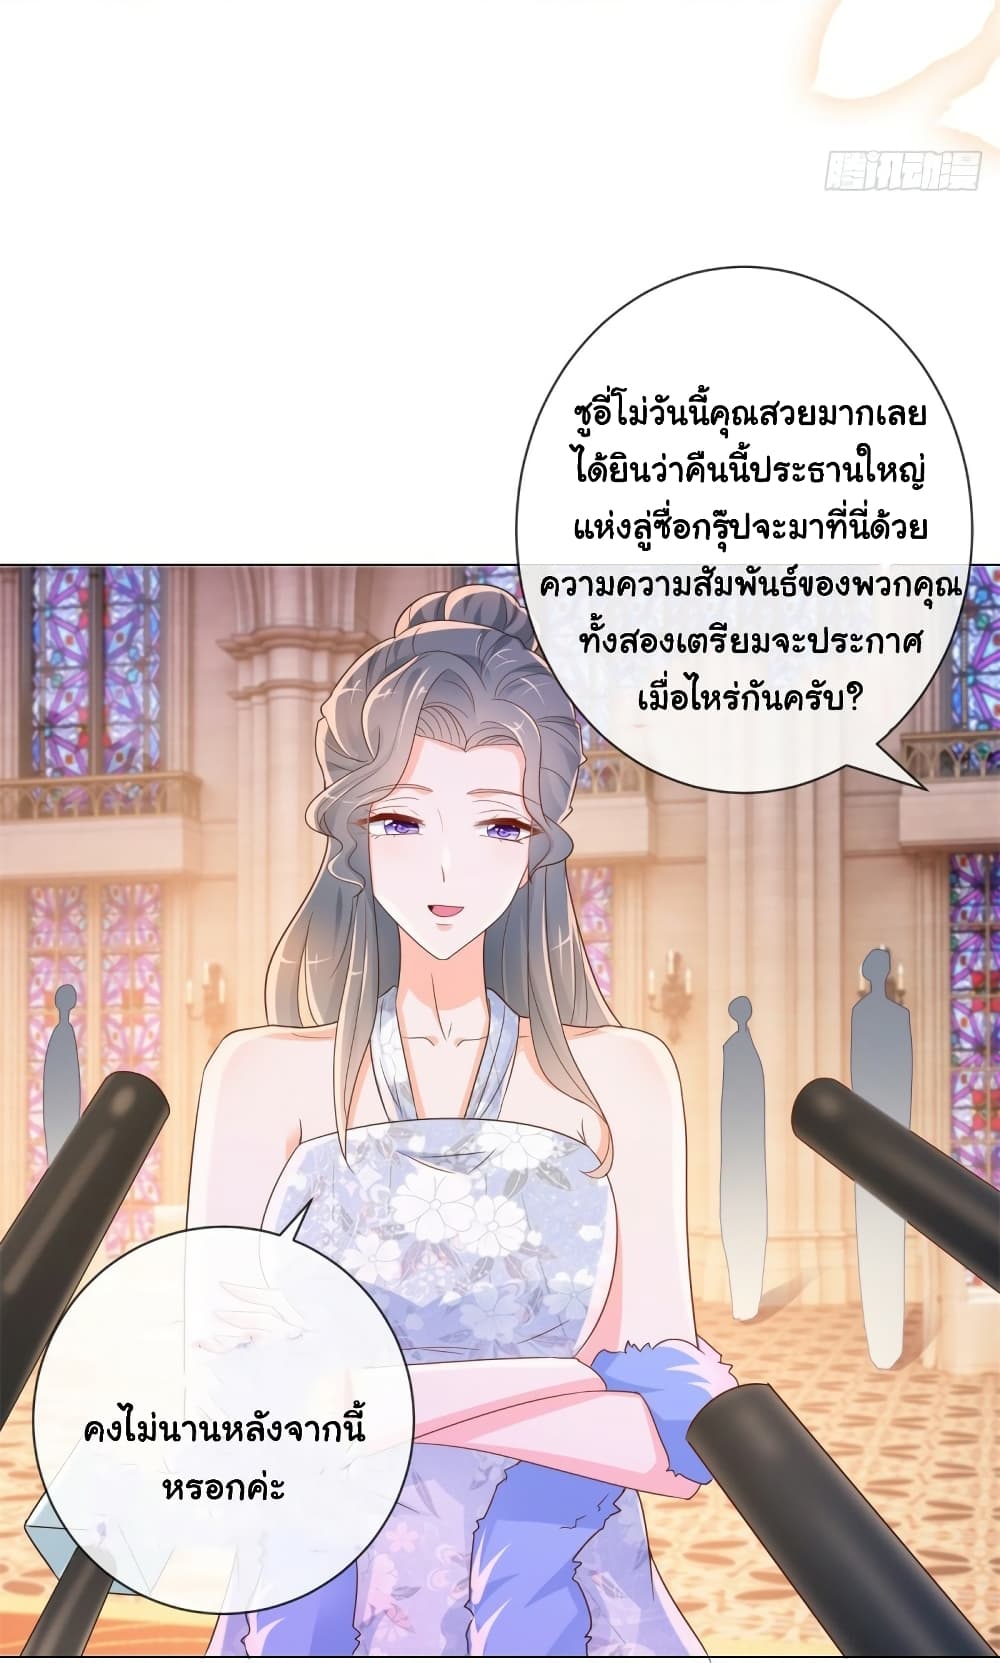 The Lovely Wife And Strange Marriage à¹à¸œà¸™à¸£à¸±à¸à¸¥à¸§à¸‡à¹ƒà¸ˆ 322 (25)